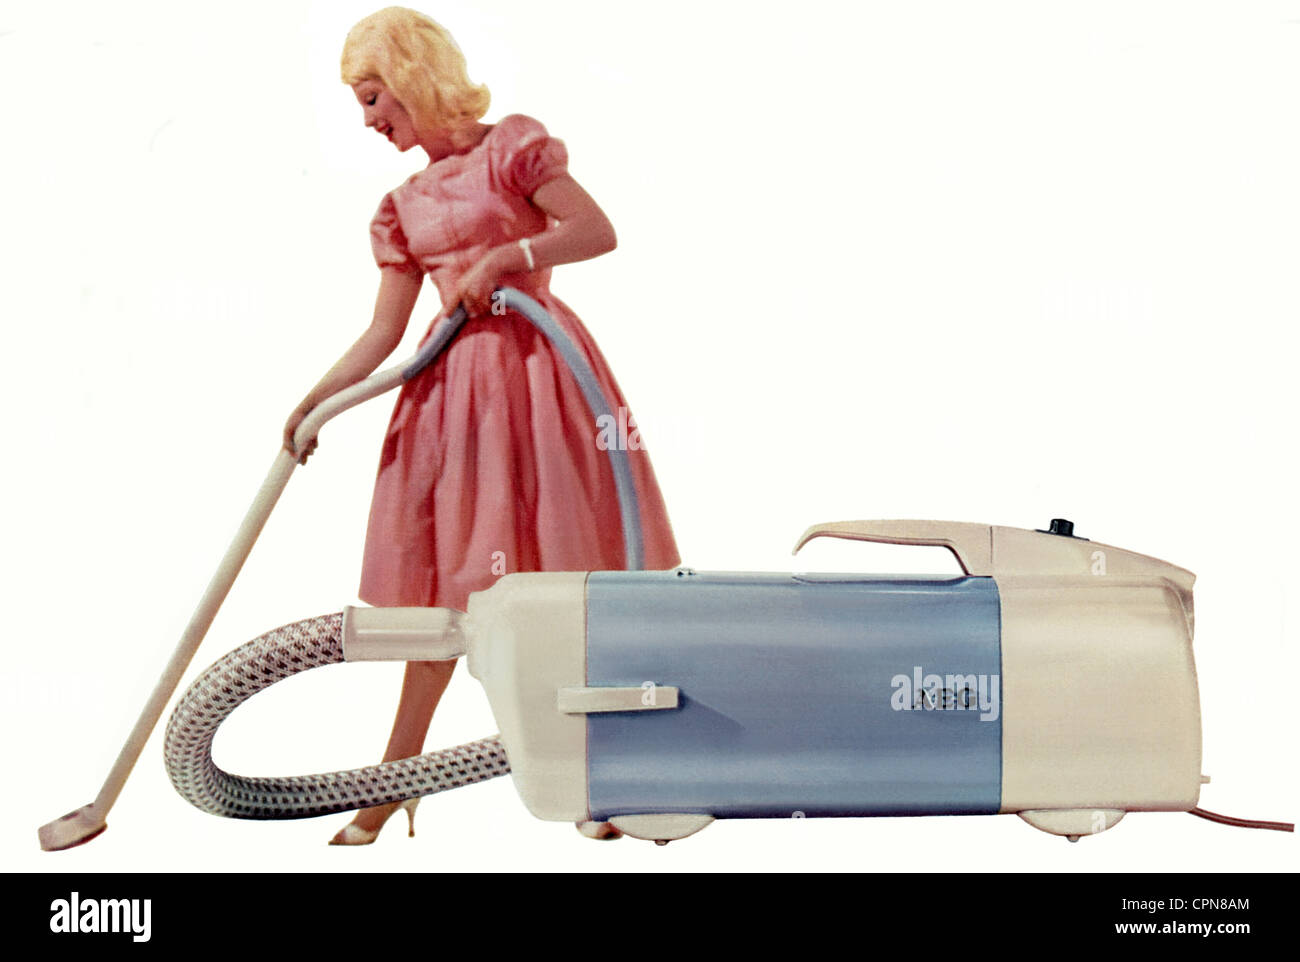 household, household appliance, housewife with vacuum cleaner, advertising for AEG vacuum cleaner Vampyr, retail price 1957: 208 DM, Germany, 1957, Additional-Rights-Clearences-Not Available Stock Photo